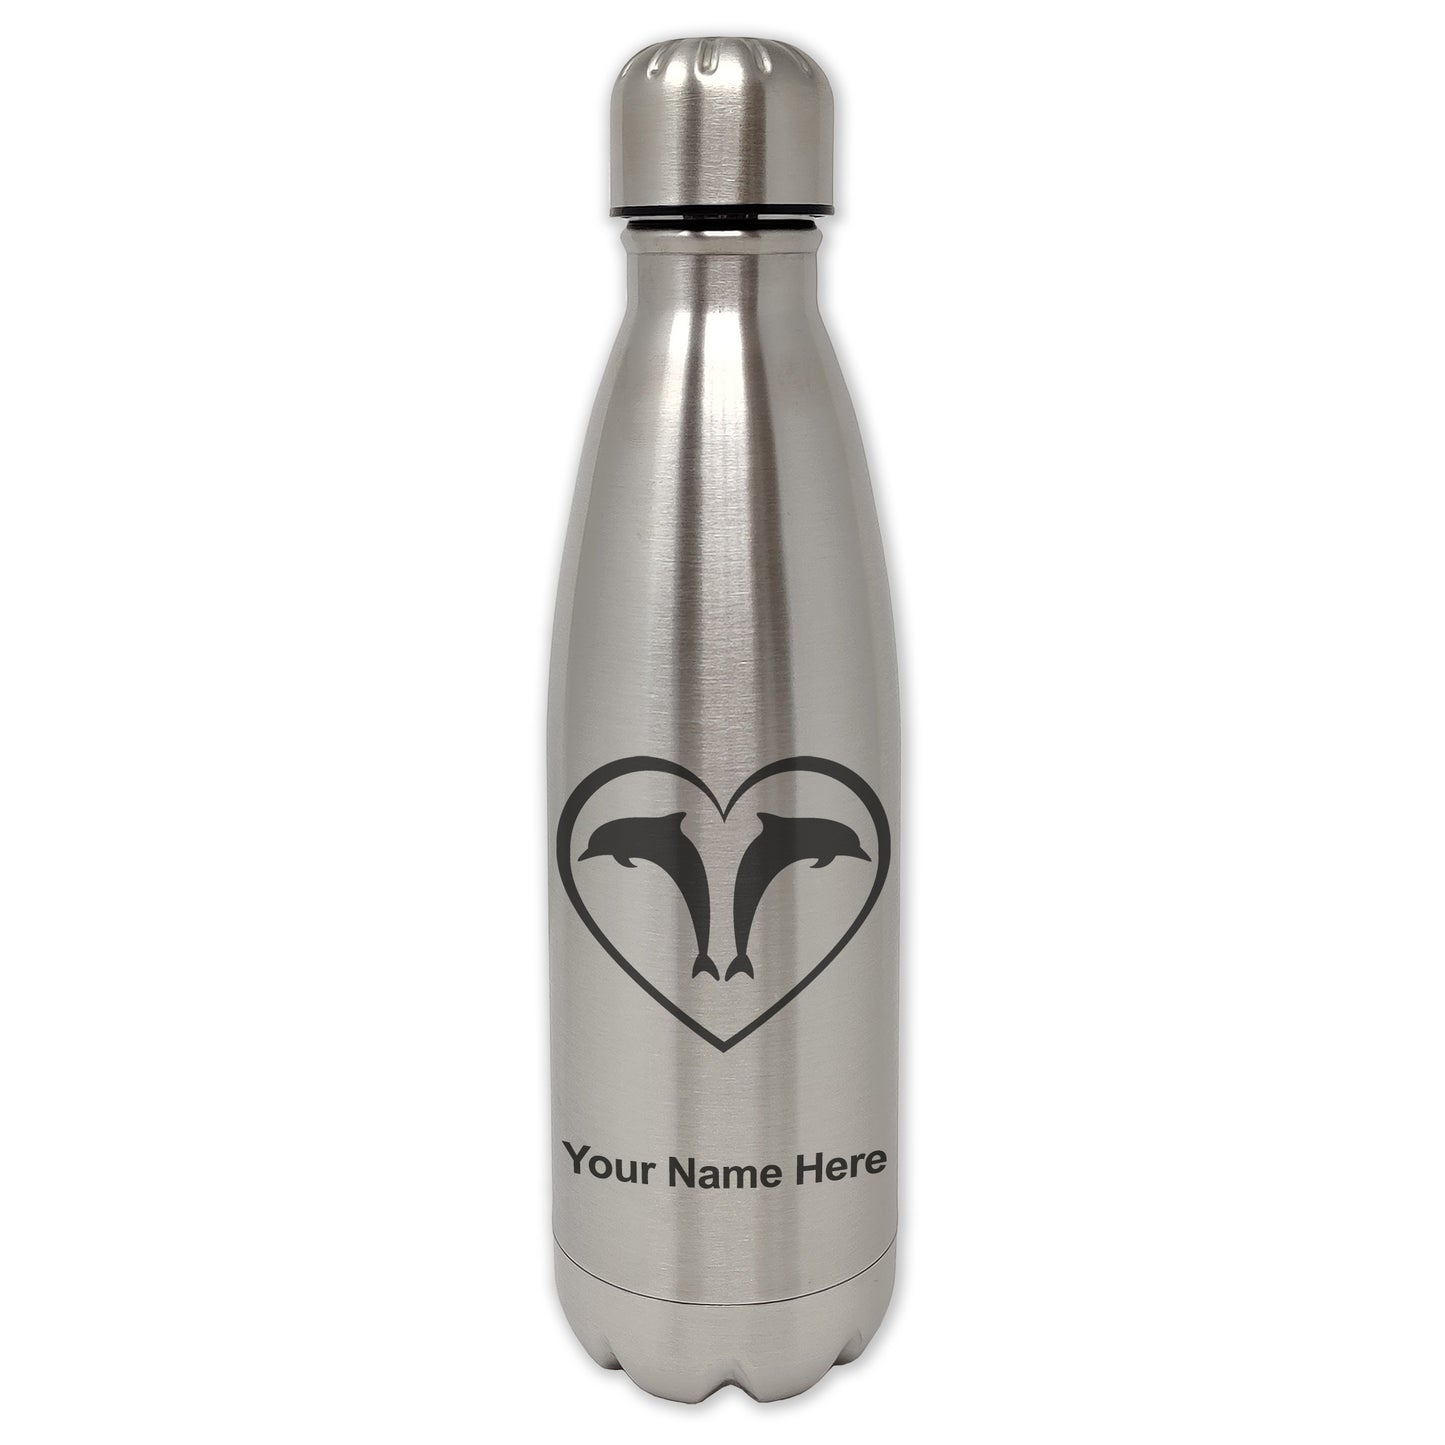 LaserGram Double Wall Water Bottle, Dolphin Heart, Personalized Engraving Included